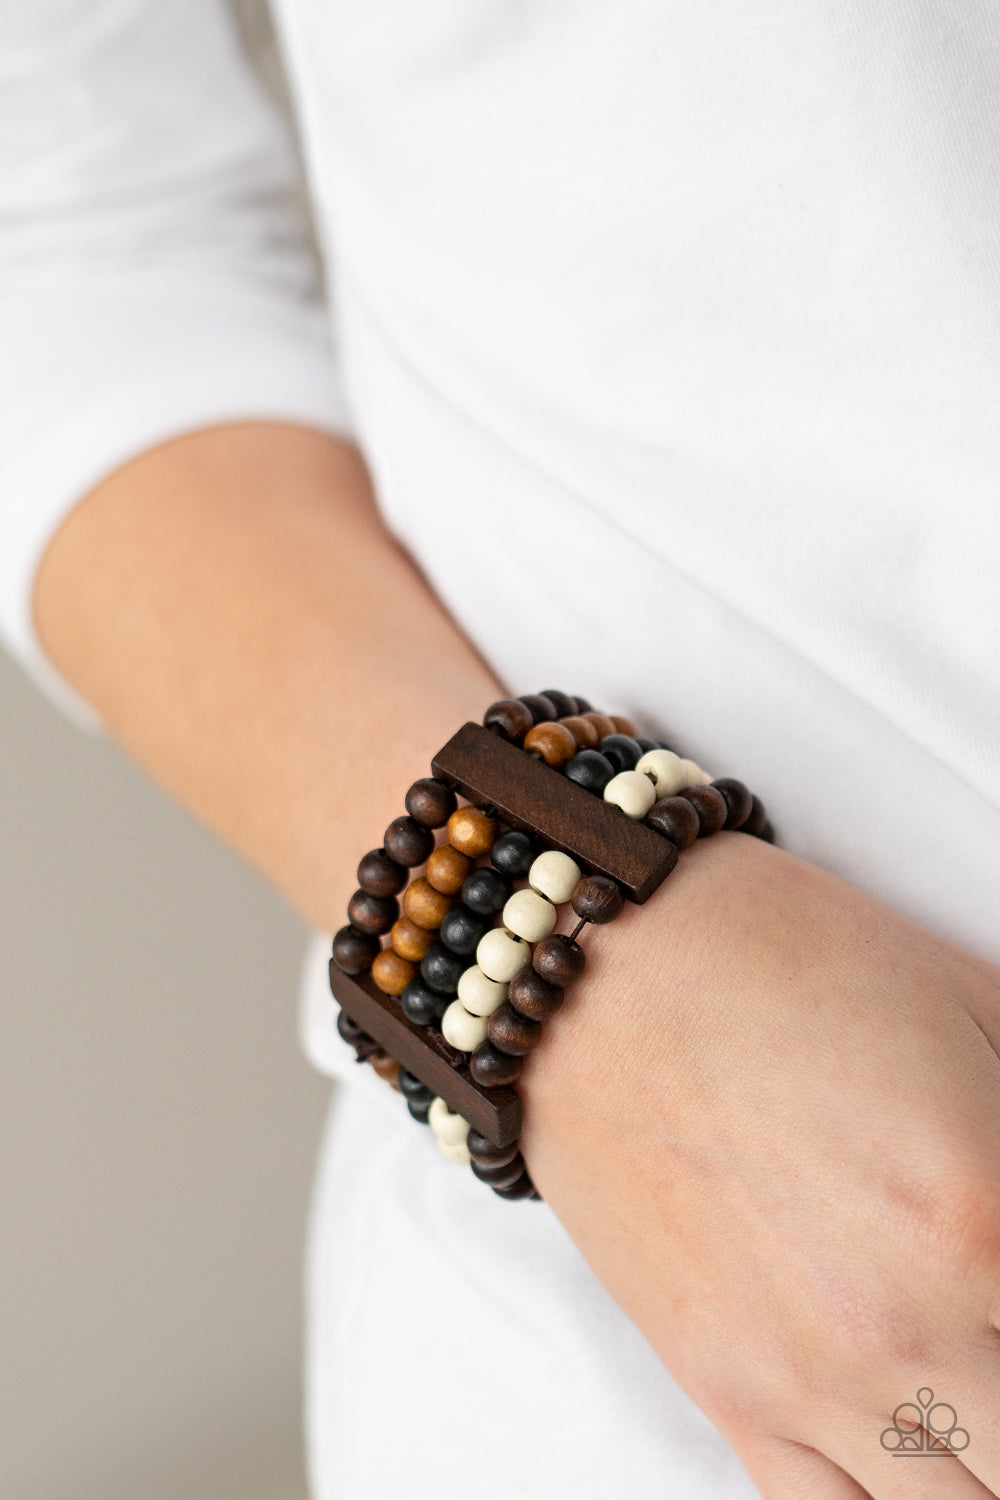 Caribbean Catwalk Multi Wooden Bracelet - Paparazzi Accessories  Held in place by rectangular wooden frames, strands of brown, black, and white wooden beads are threaded along stretchy bands around the wrist for a colorfully tropical look.  All Paparazzi Accessories are lead free and nickel free!  Sold as one individual bracelet.